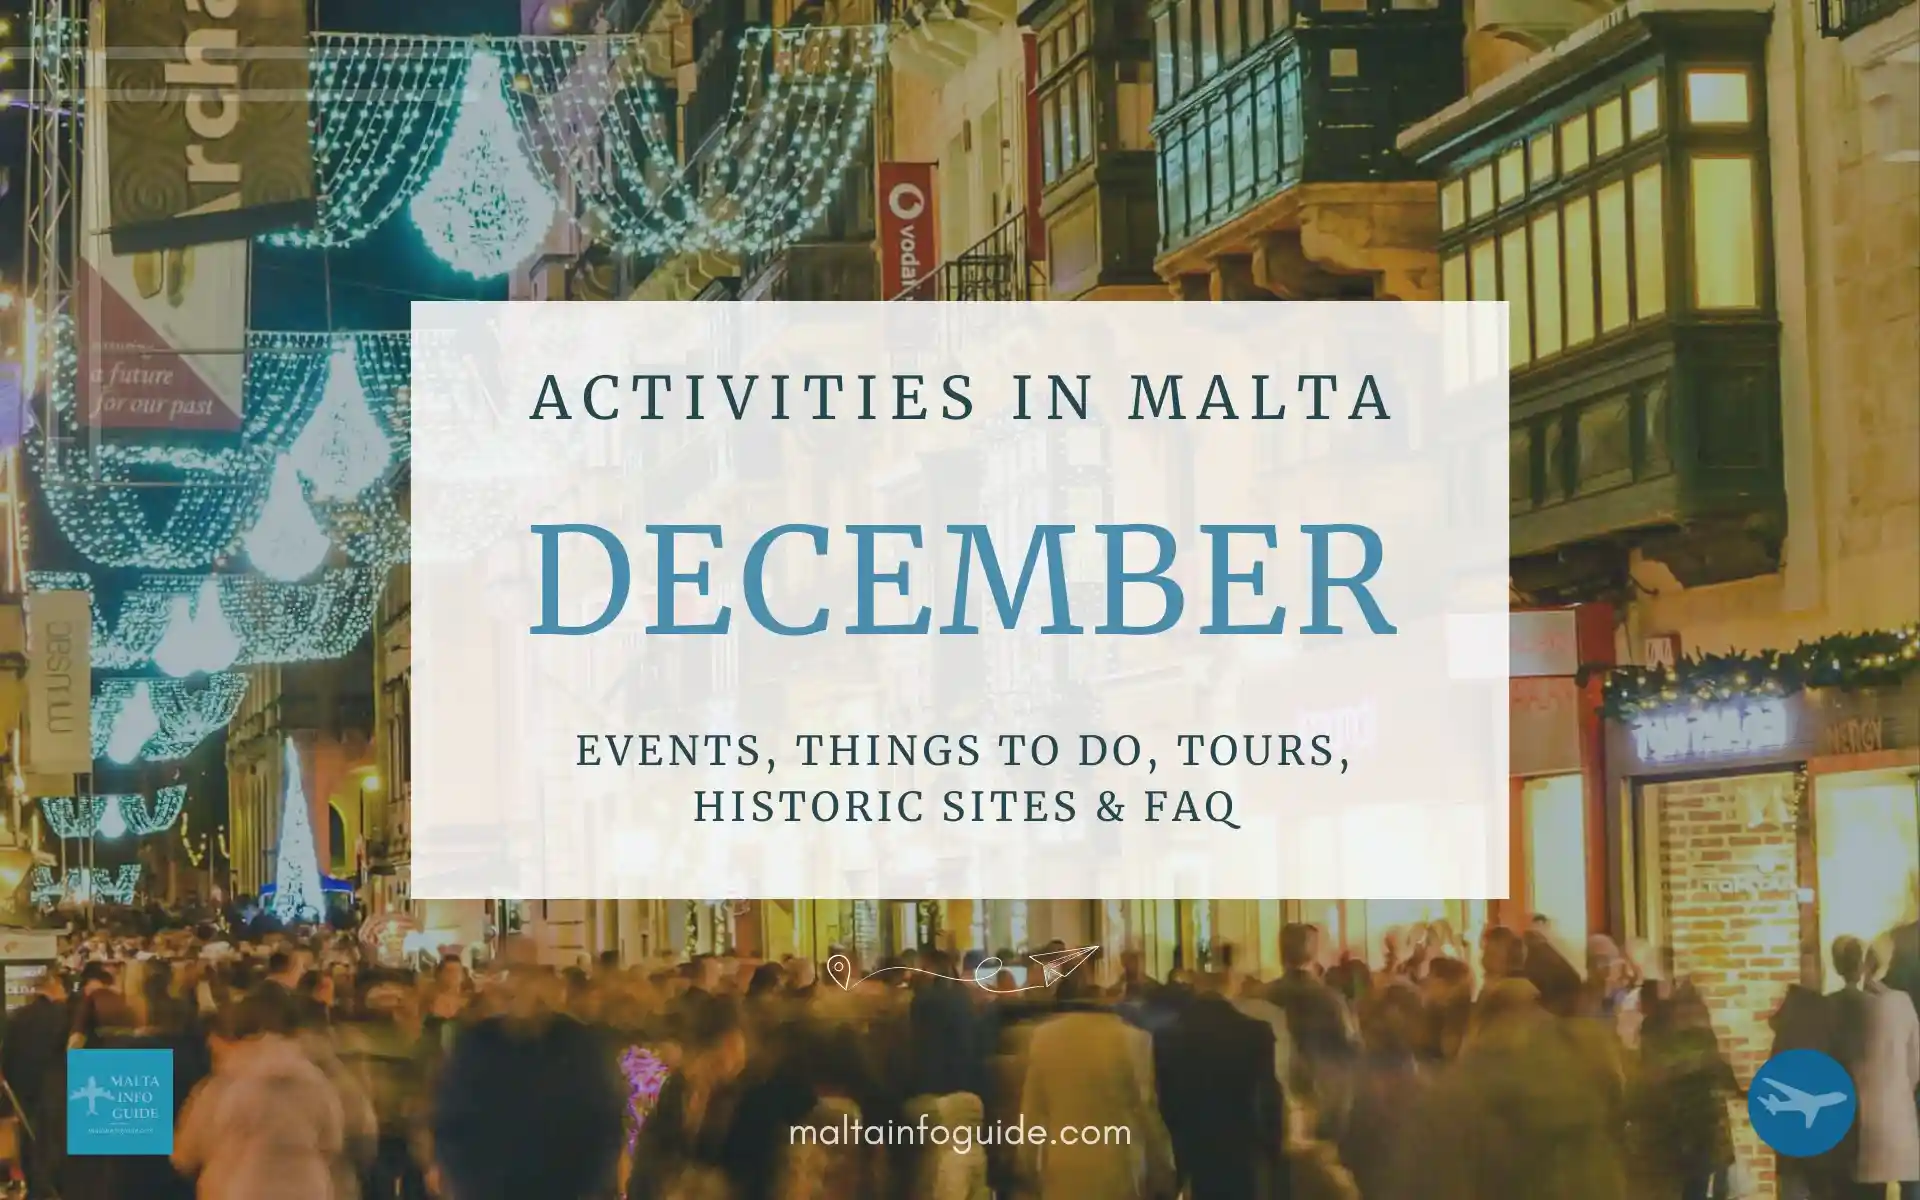 An overview of the activities in Malta in December, including dates for pantomimes, Christmas markets, crib exhibitions, shows and other events.